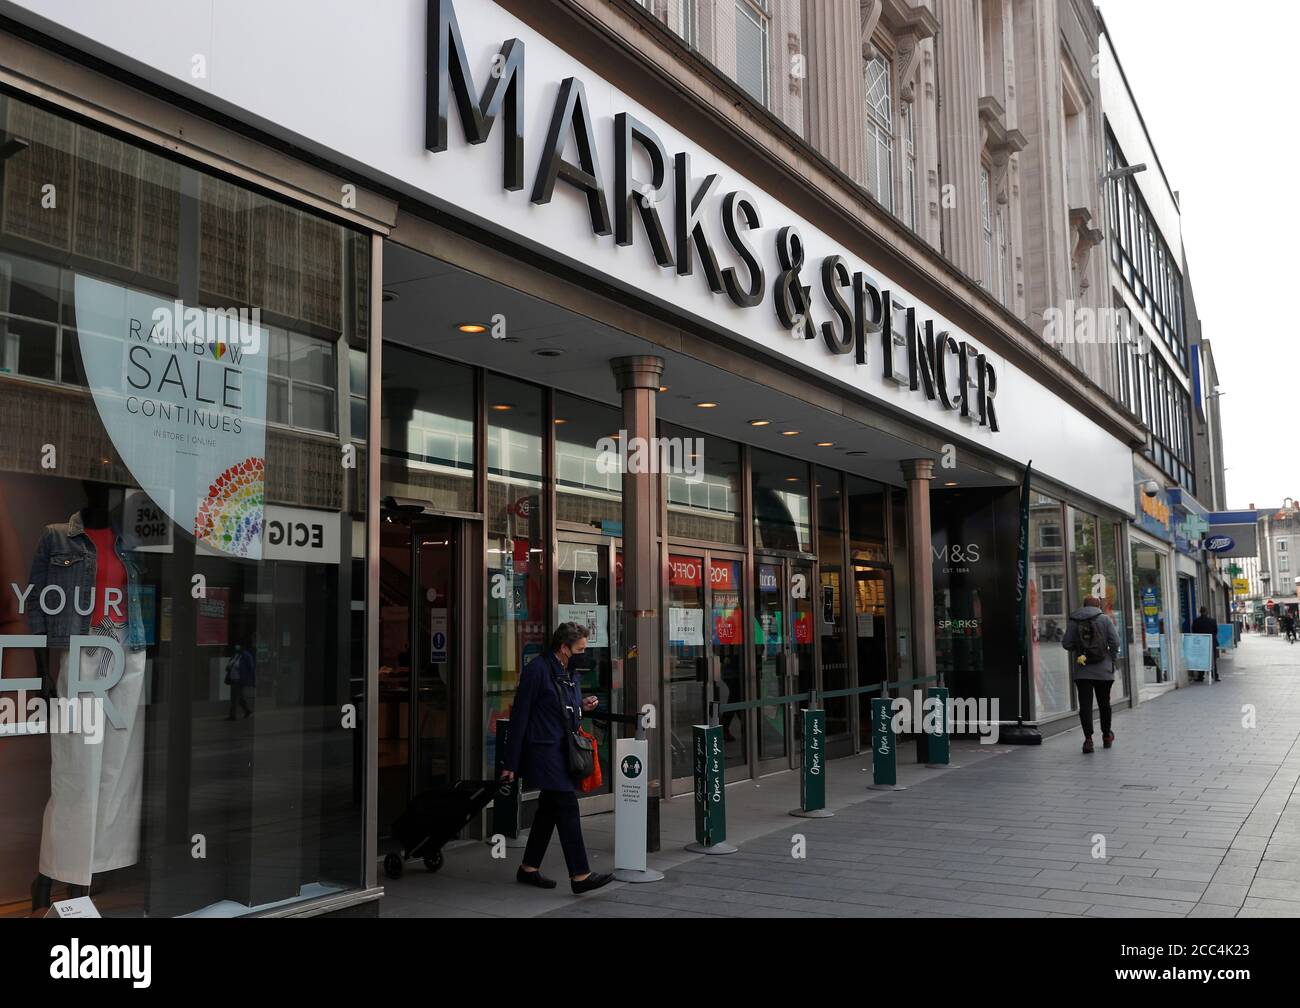 Marks & Spencer to cut 7,000 jobs as clothing sales collapse